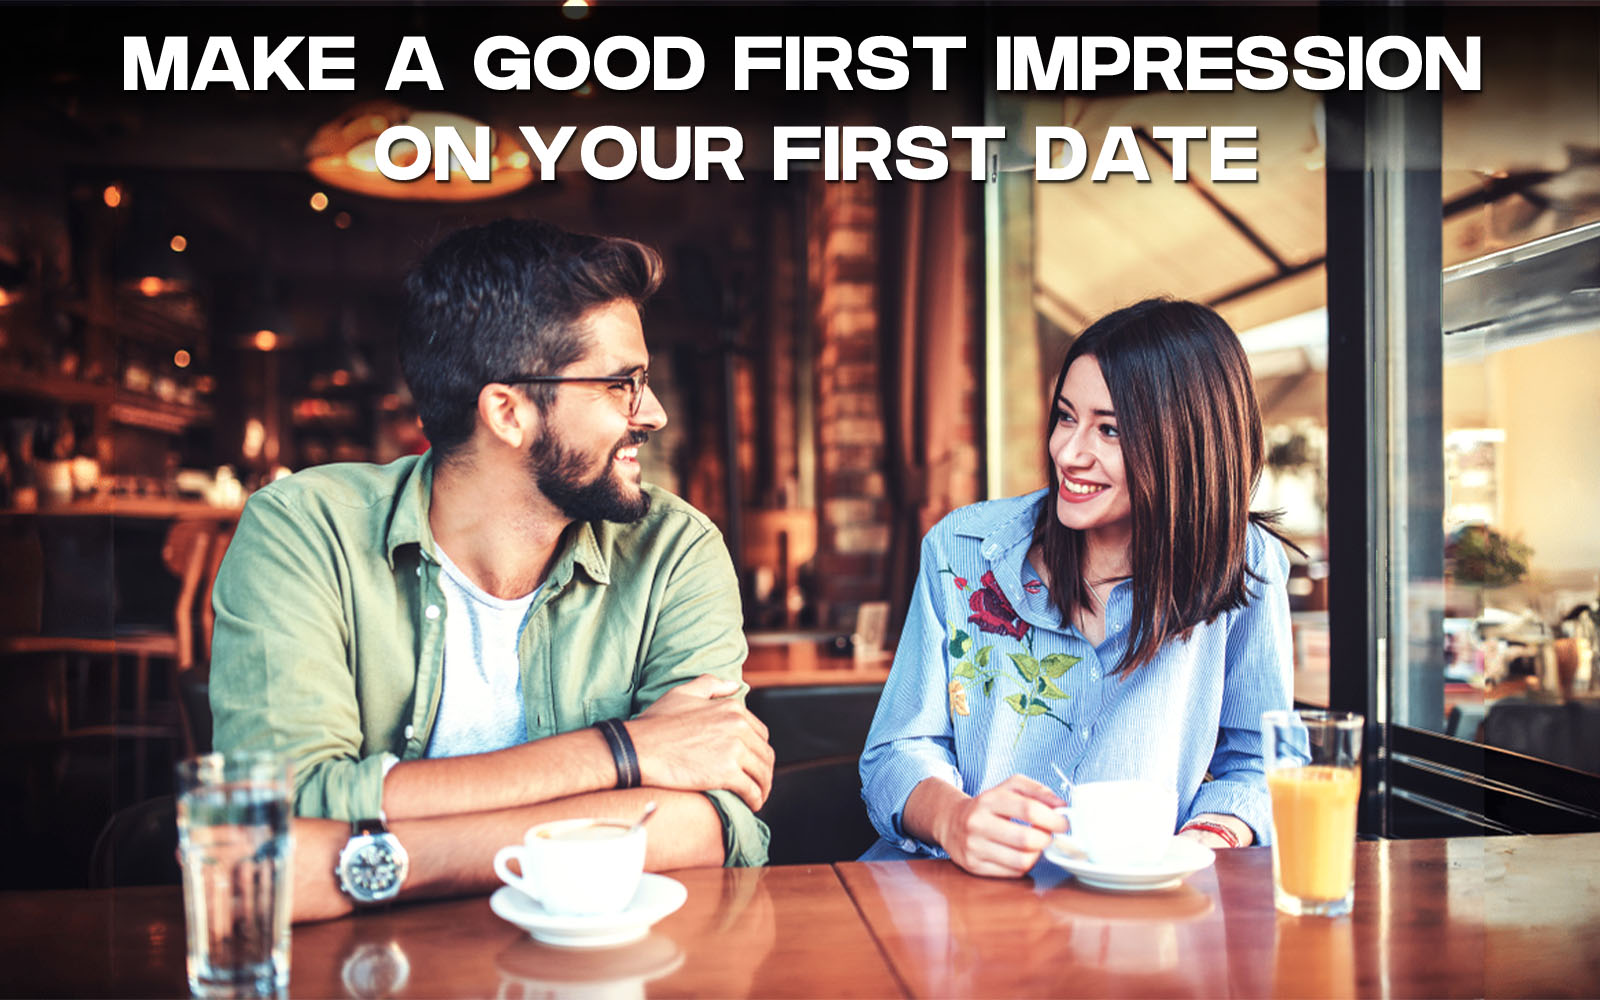 Make a Good First Impression on Your First Date